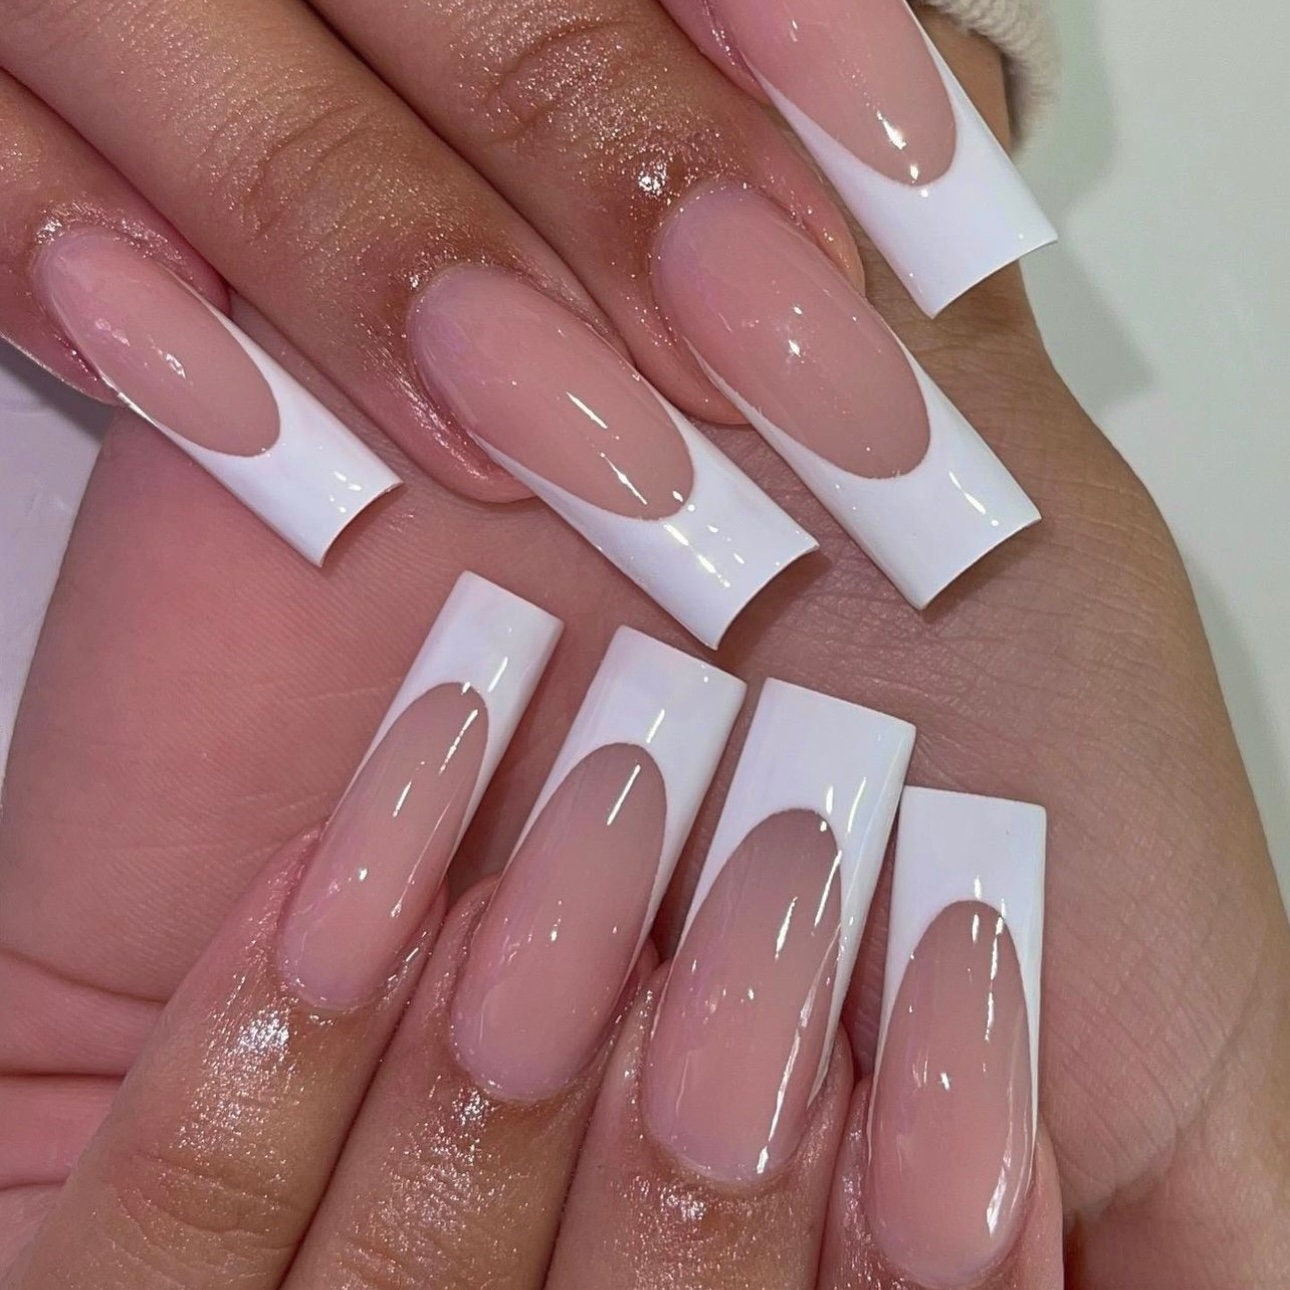 Ombre GEL nails pink & white (without sponge ) Babyboomer 💅🏻 Ομπρέ με  Τζέλ 💫 - YouTube